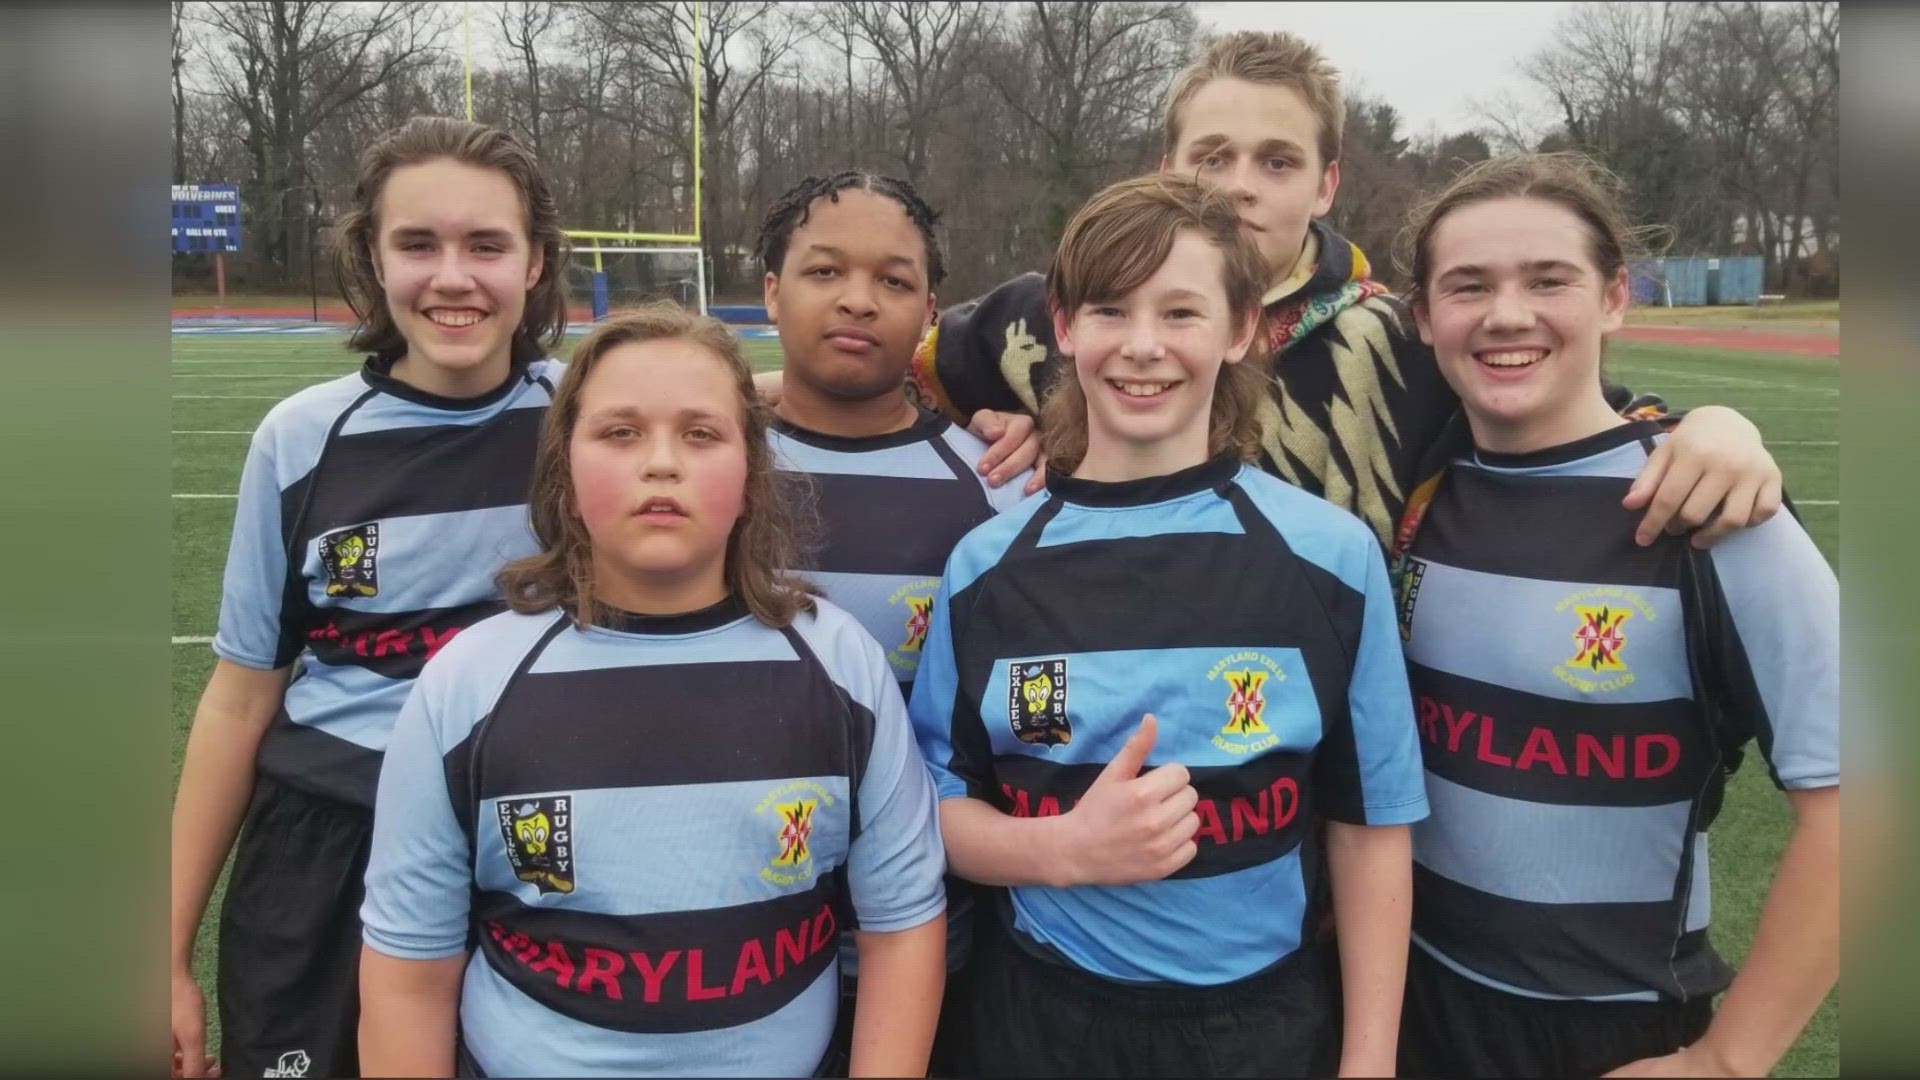 The Maryland Exiles Youth Rugby team needs your help. They say hackers stole thousands of dollars from their bank account.